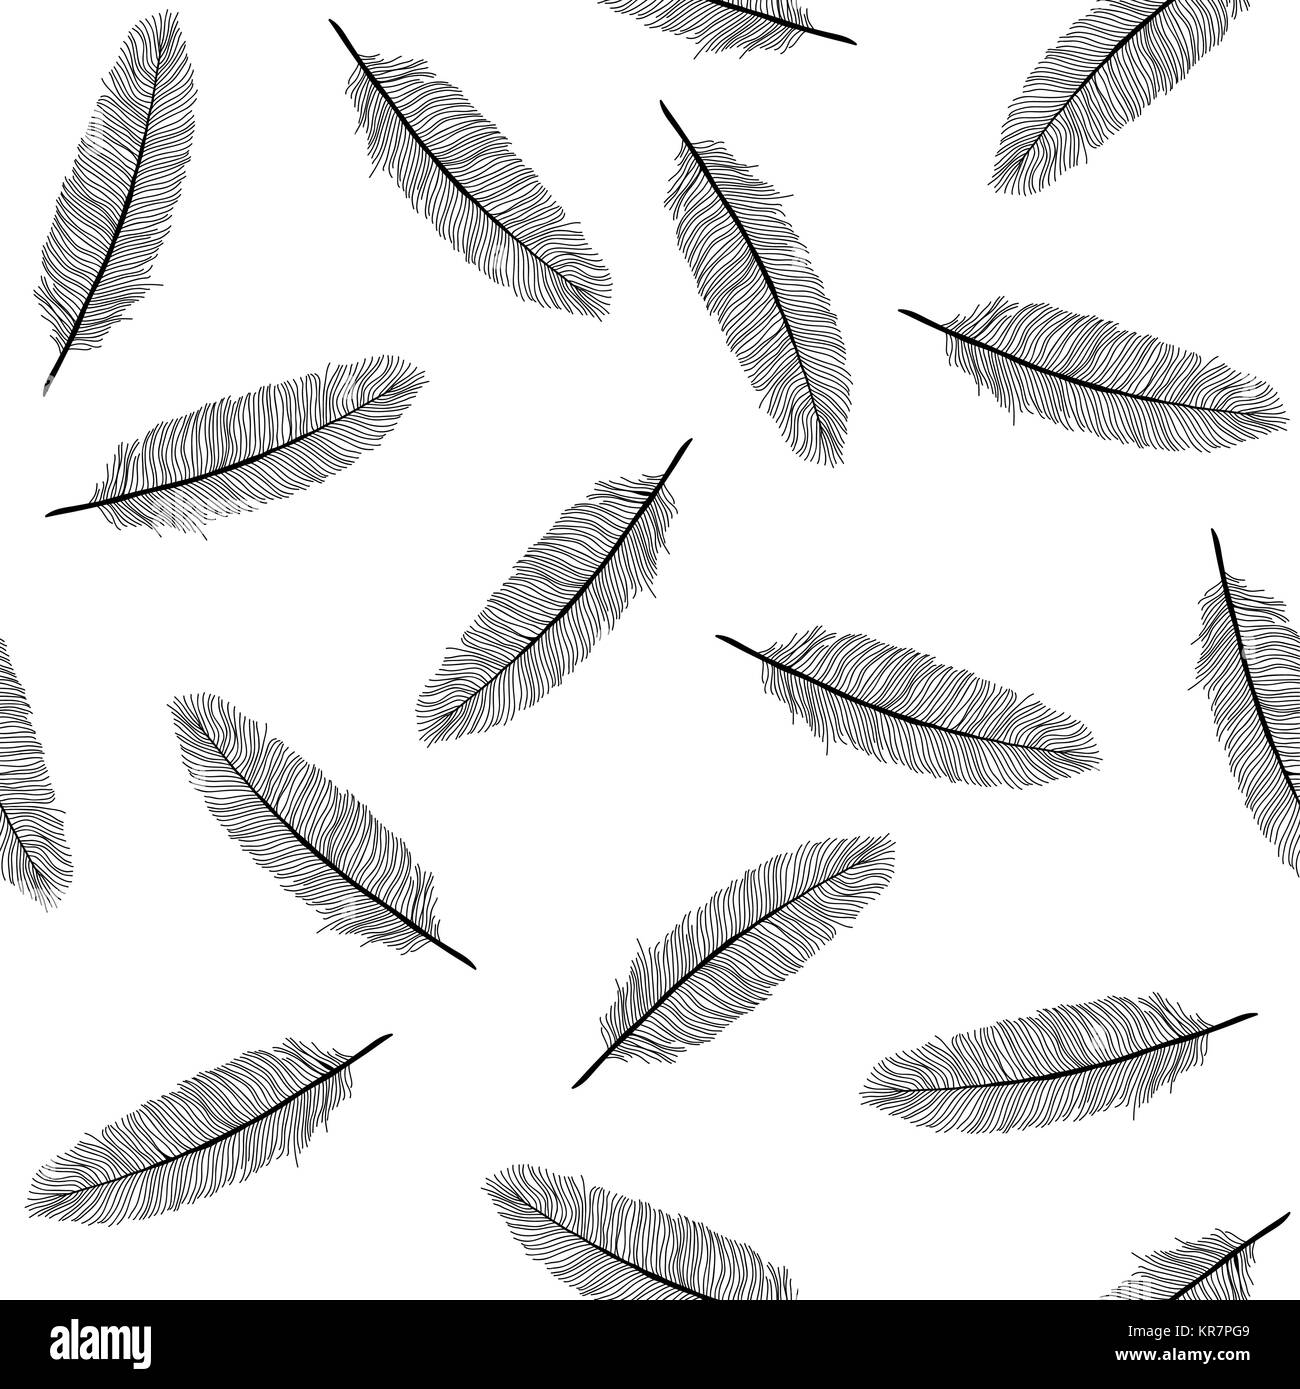 Fluffy bird feathers. Black and white seamless pattern. Vintage background. Hand drawn feathers isolated on white background. Hand drawn art. Stock Vector